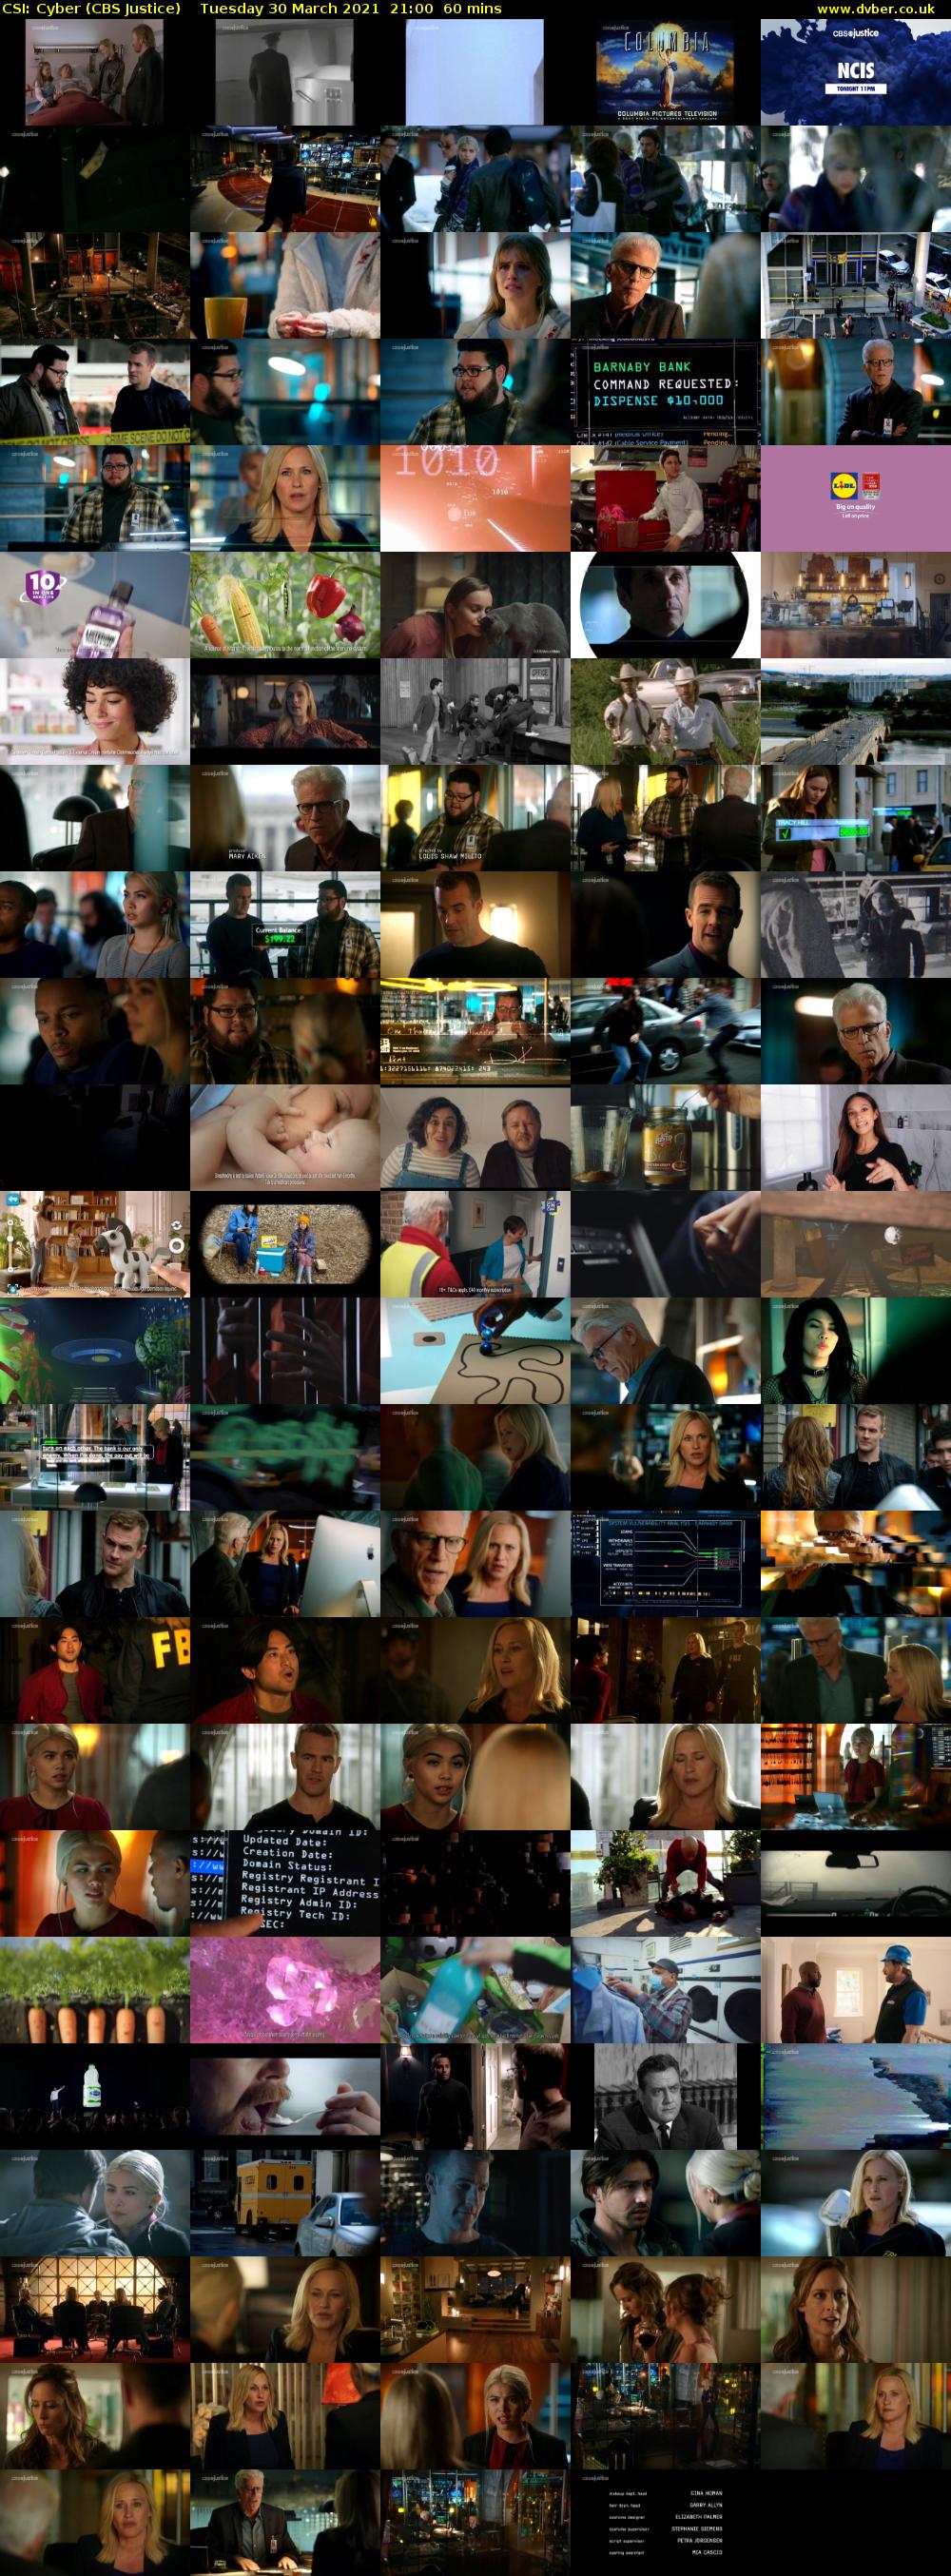 CSI: Cyber (CBS Justice) Tuesday 30 March 2021 21:00 - 22:00